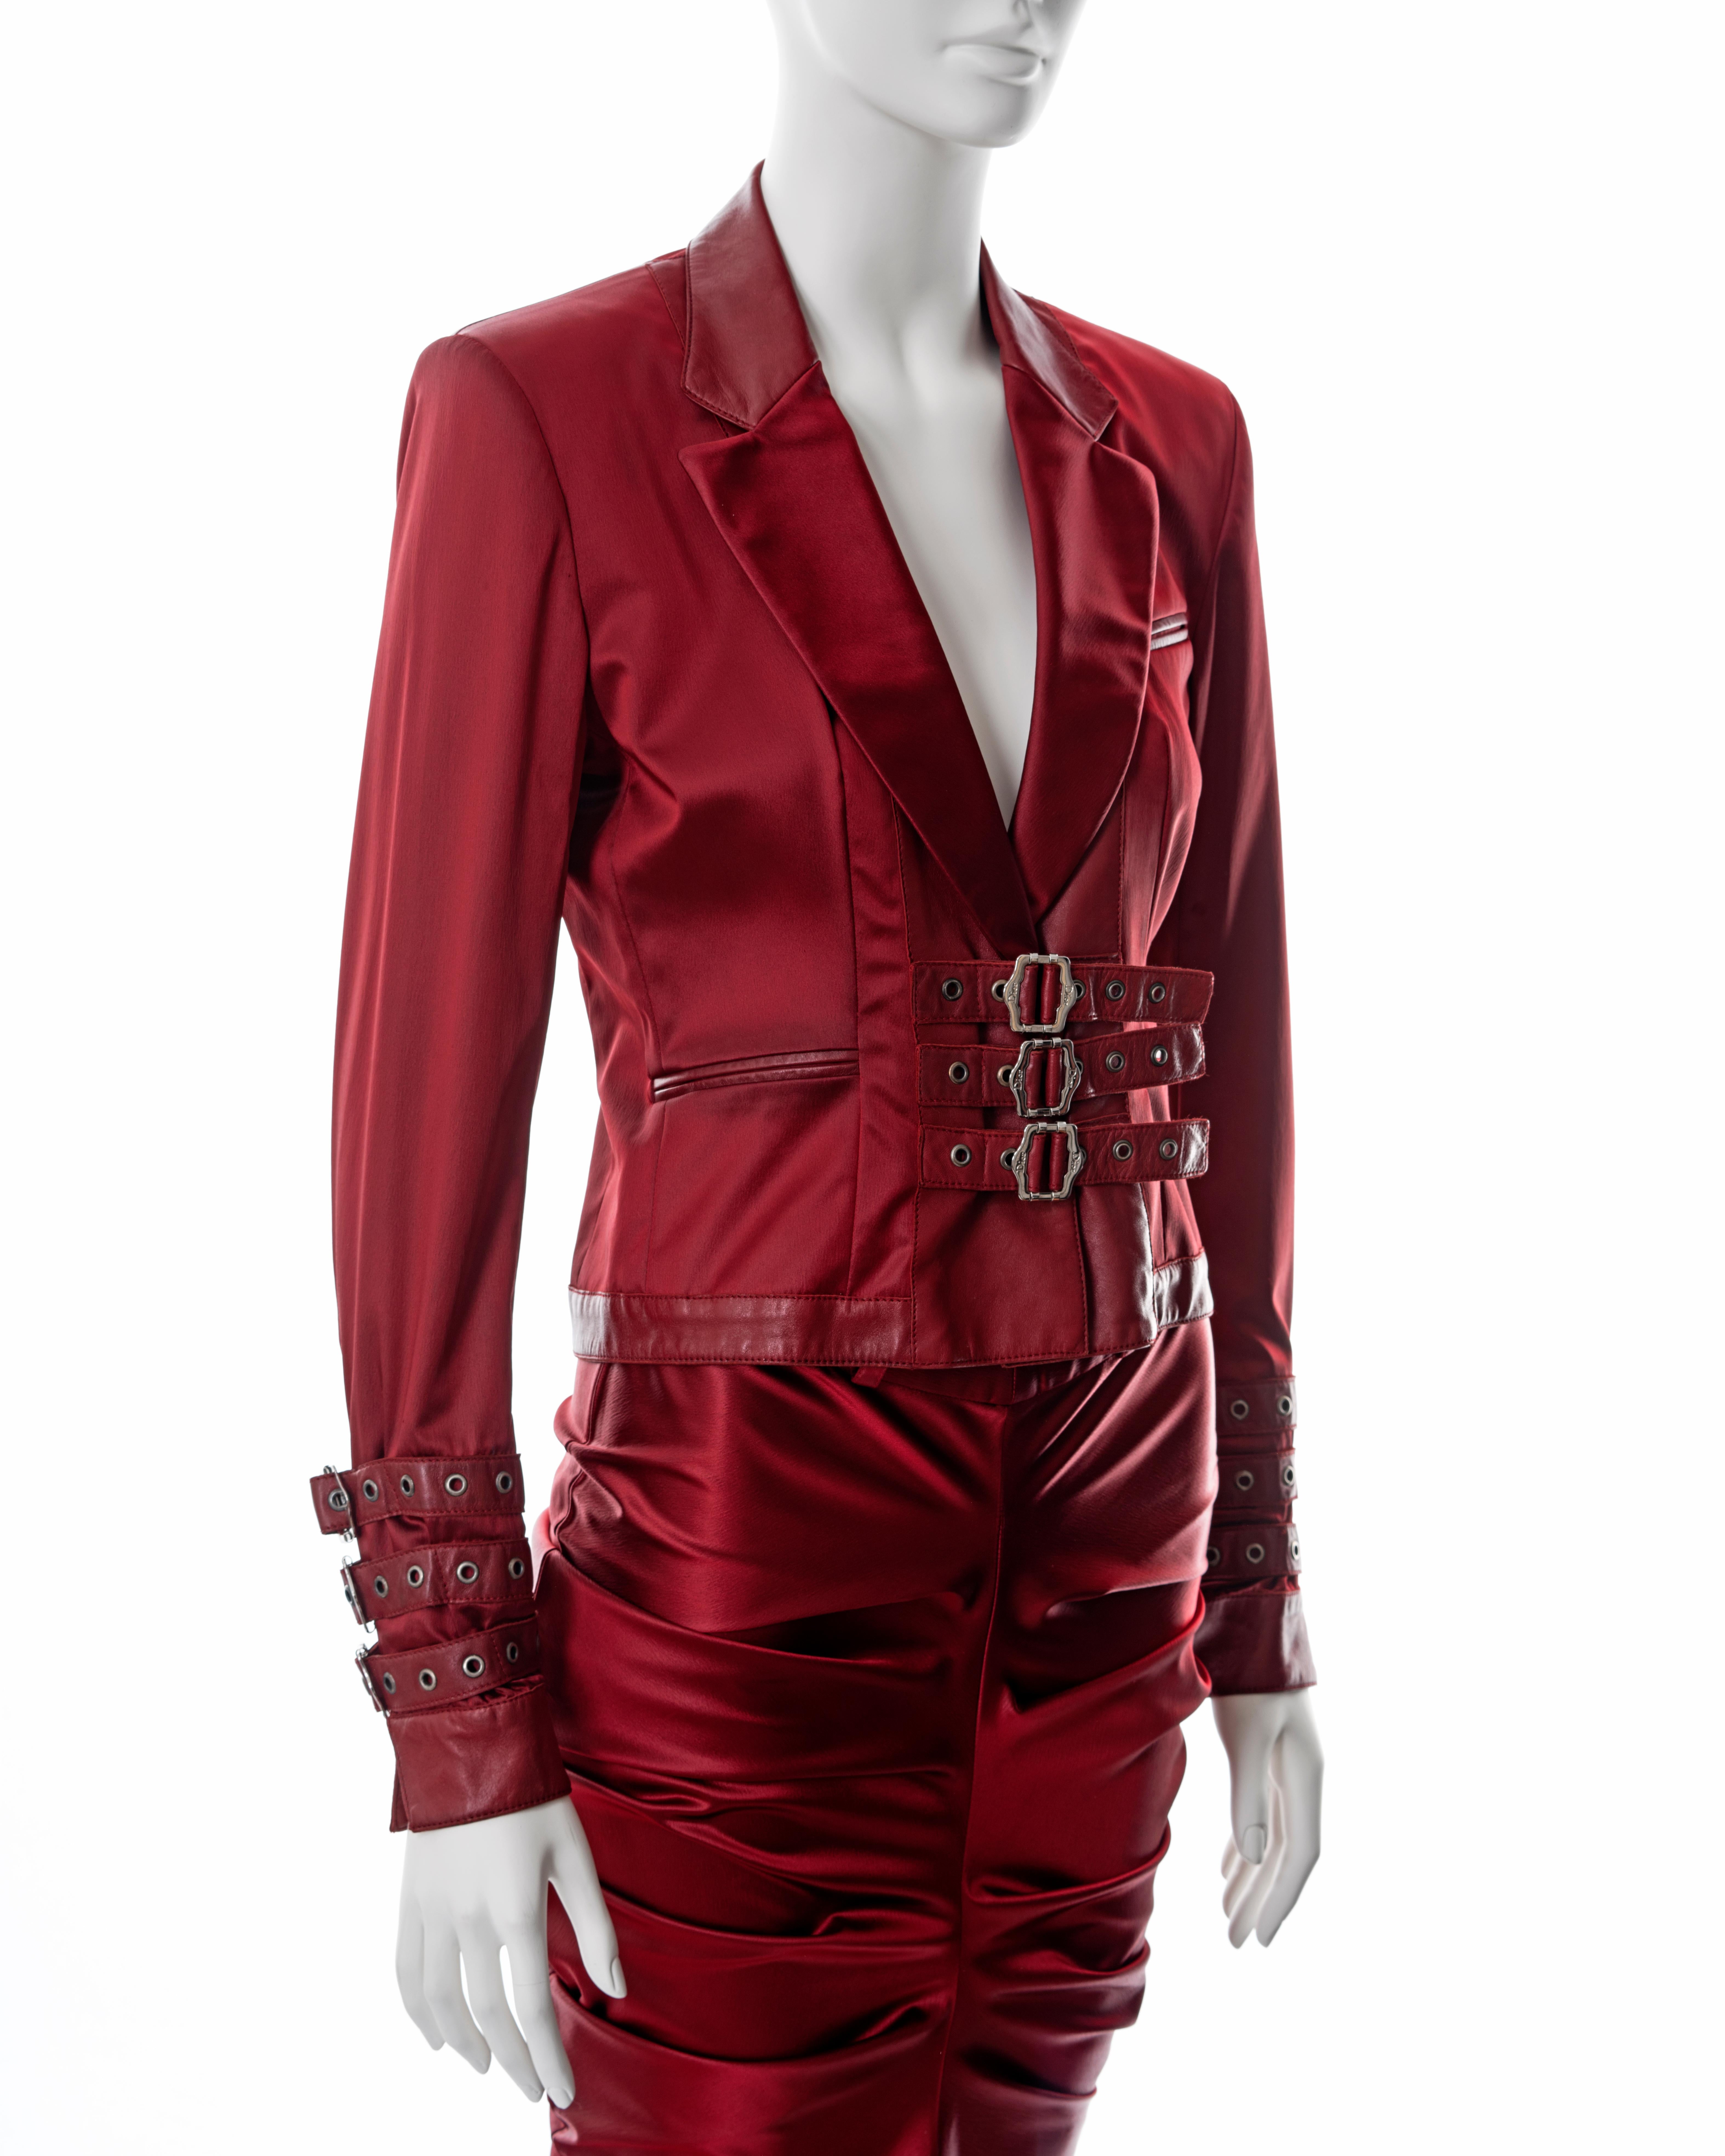 Christian Dior by John Galliano red satin and leather skirt suit, fw 2003 For Sale 1